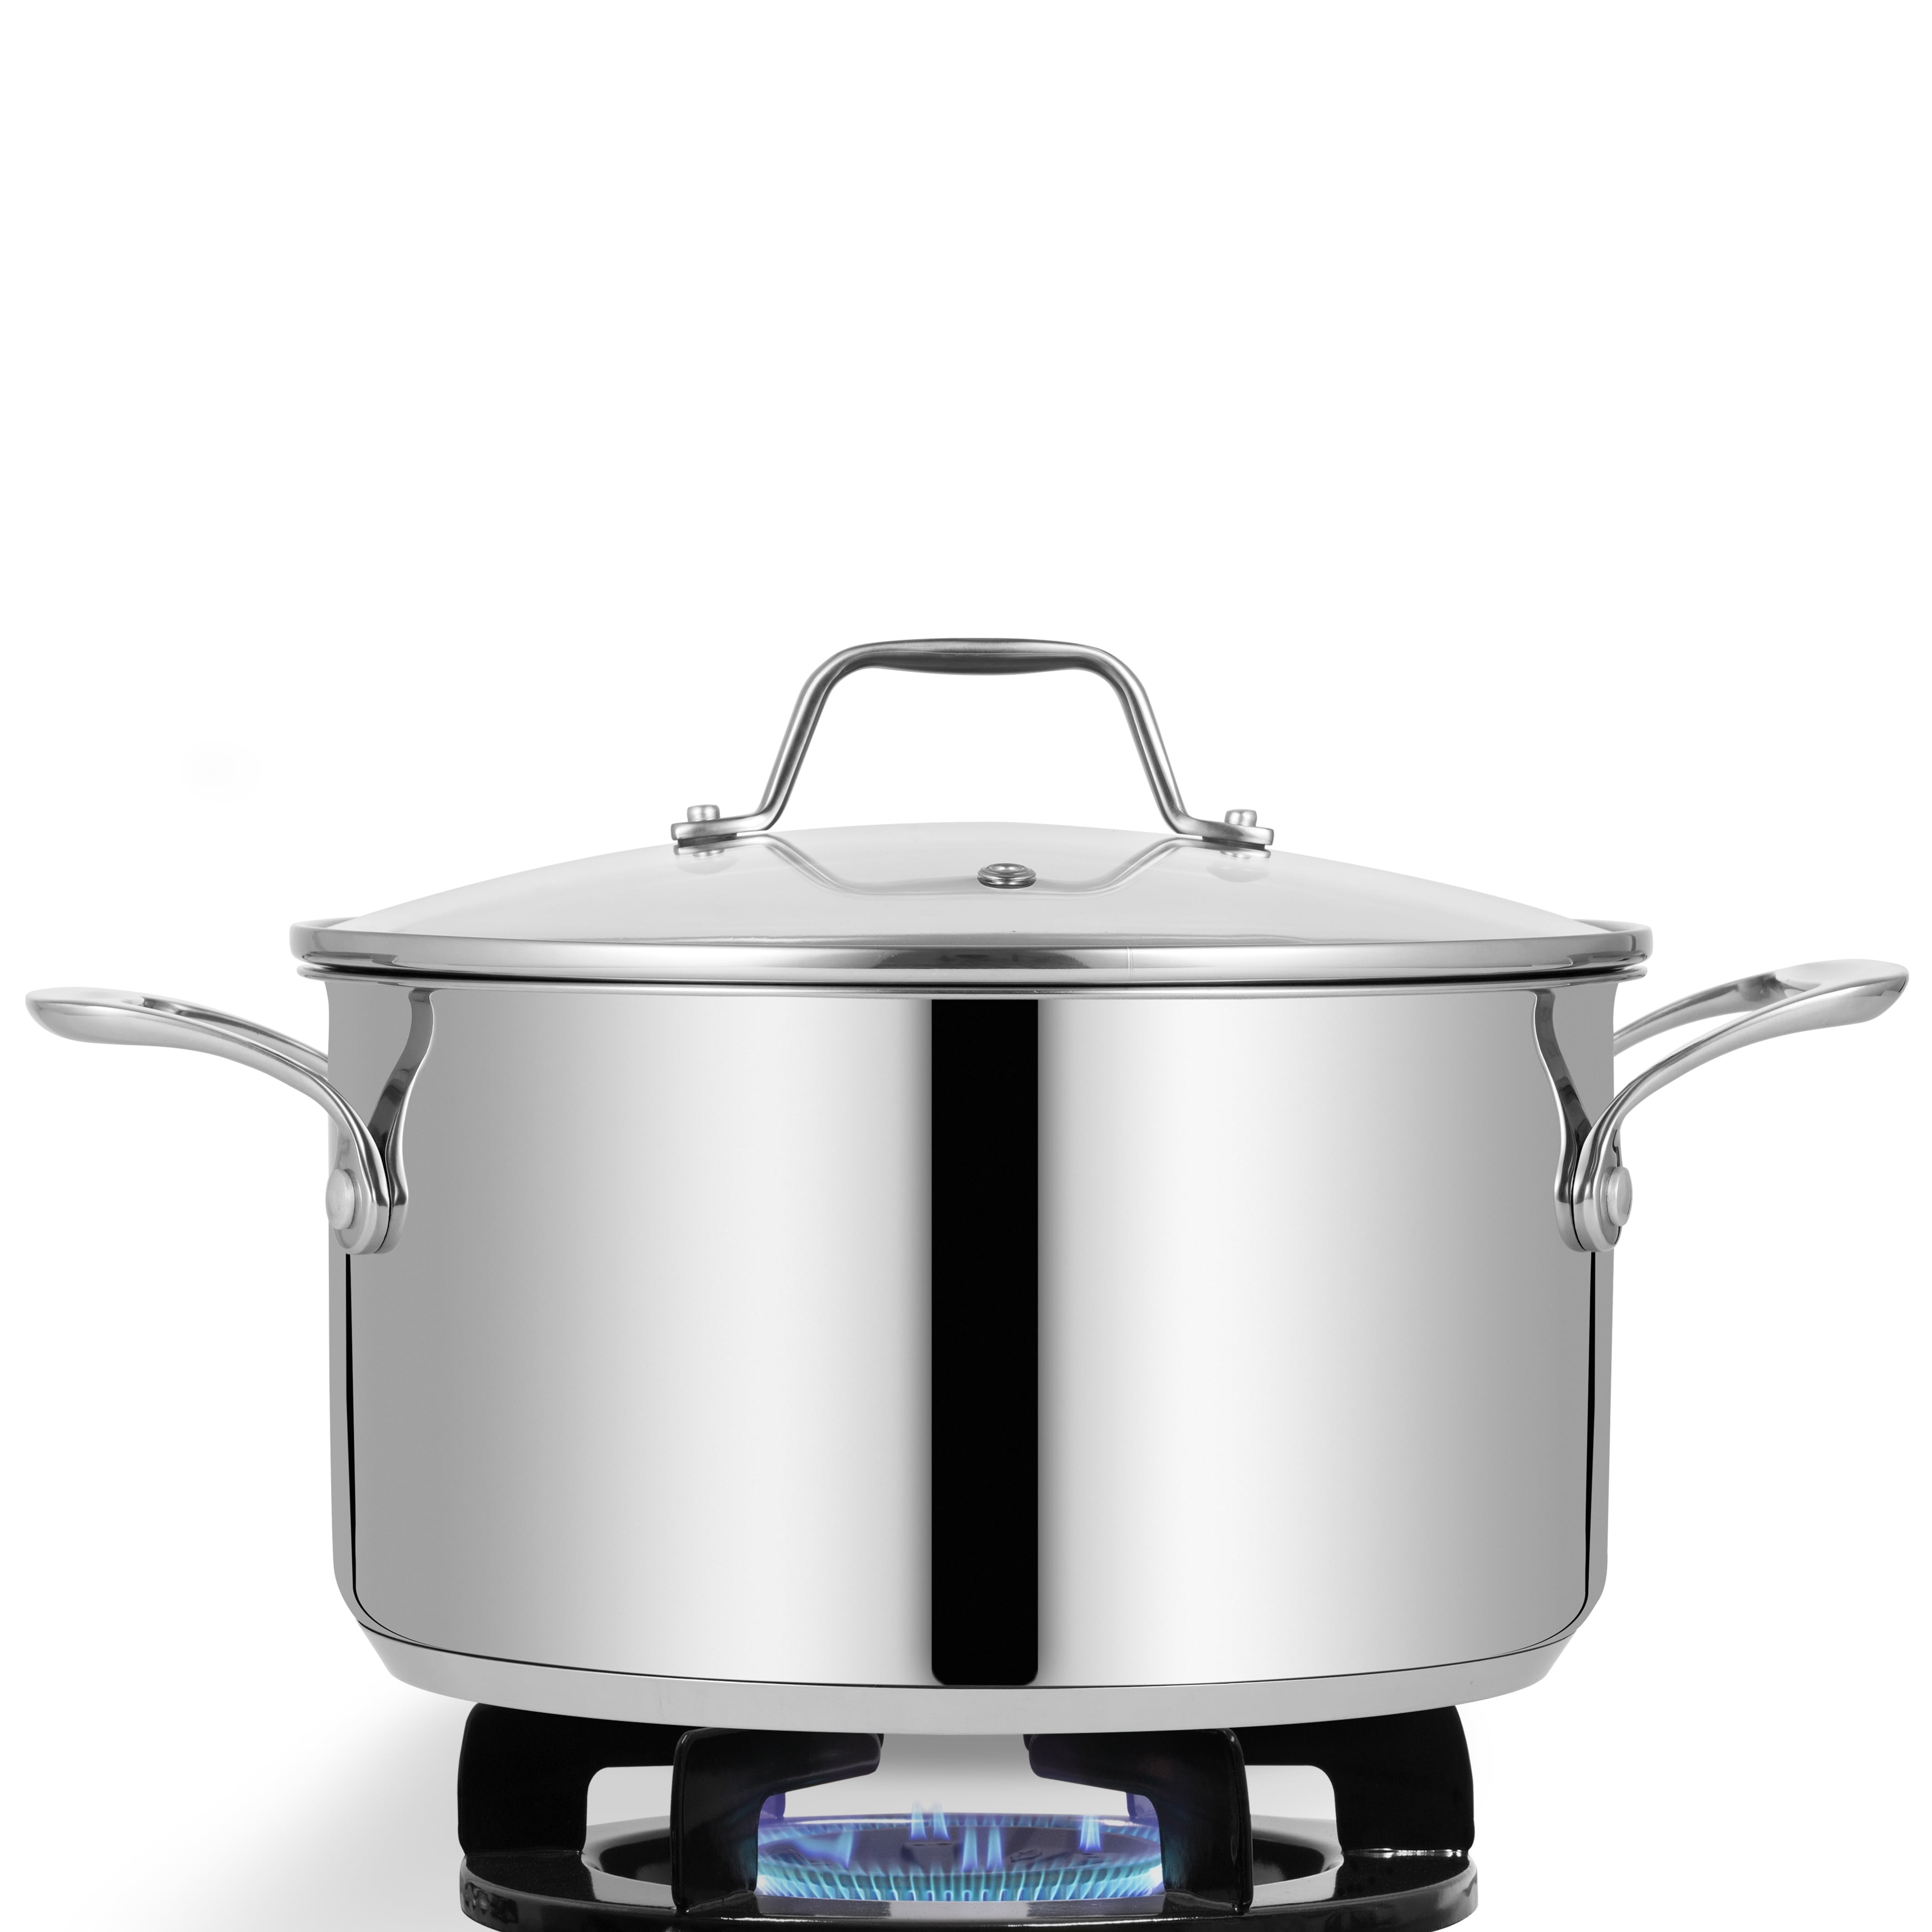 Mirror Polished Large Nickel Free Stainless Steel Stock Pot 16 Quart with Lid 